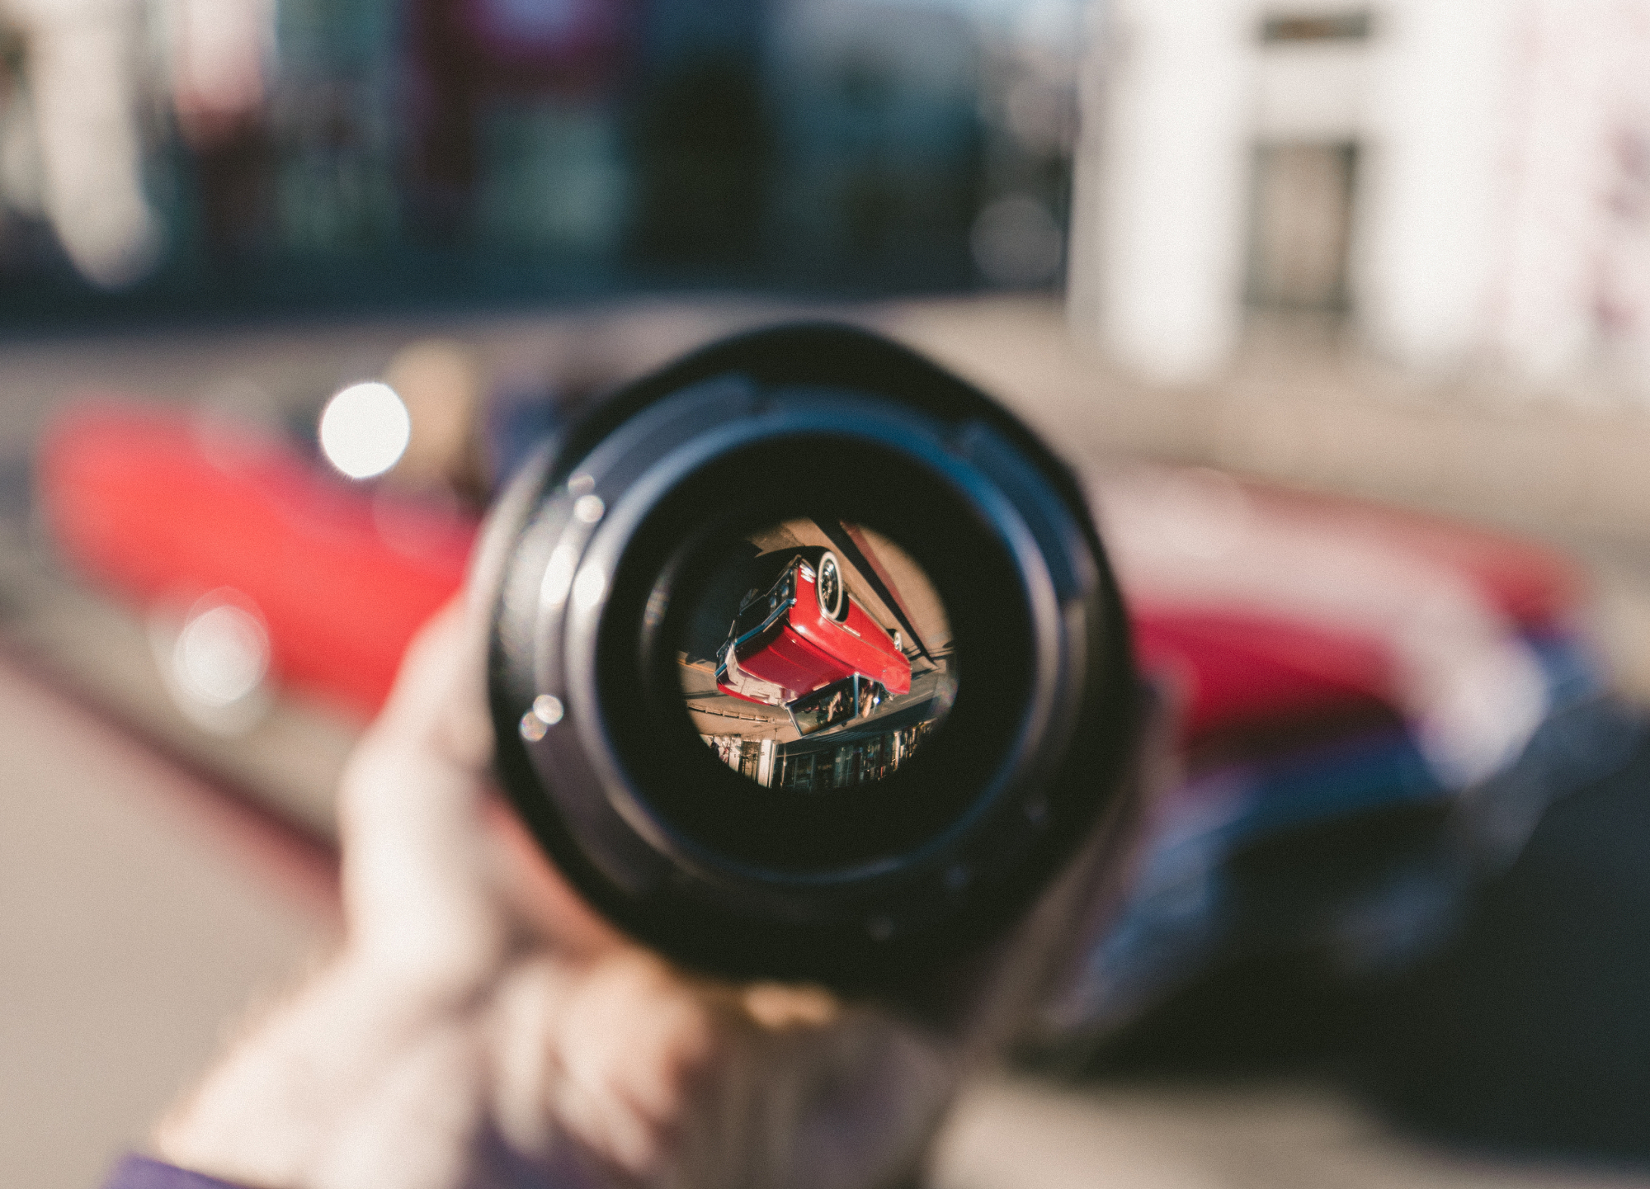 looking at a red car through a camera lens shown upside down and focused surrounded by a blurred view.